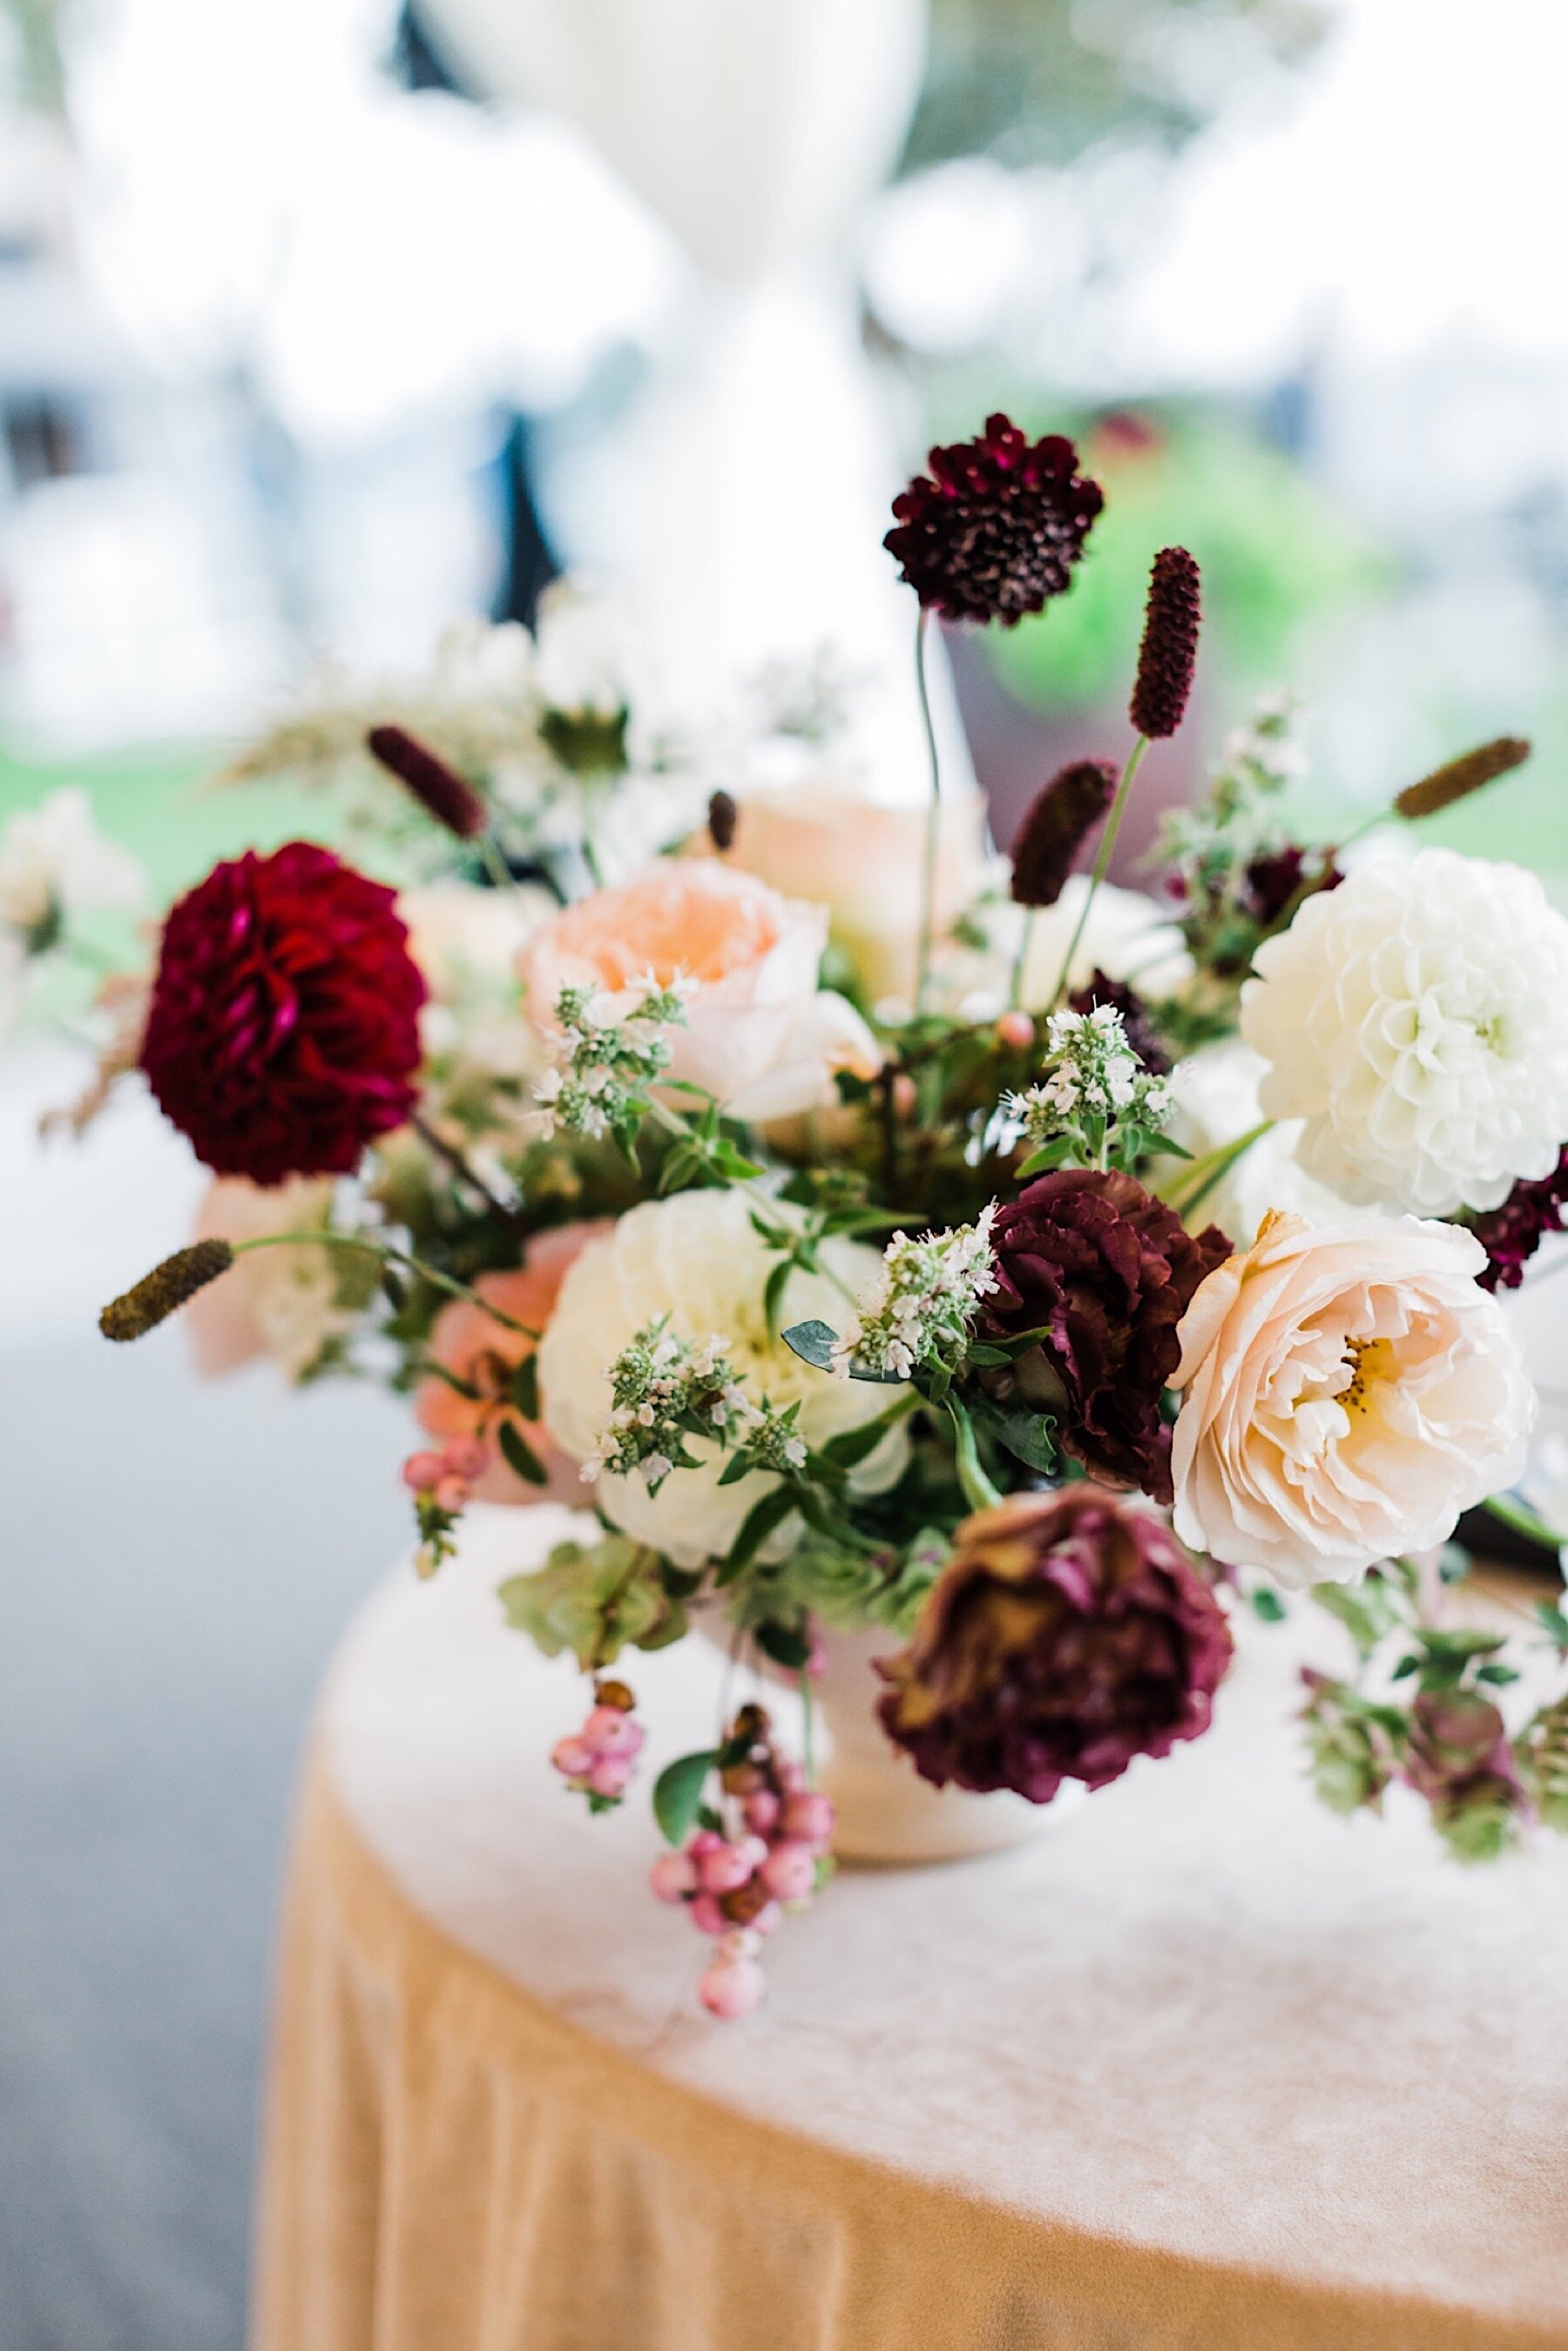 16_shaxton-ngo-429_A_Woodmark_floral_top_with_Florist_Gather_Design_from_Company_at_romantic_the_wedding_lush_Seattle_Wedding_design_Hotel.jpg